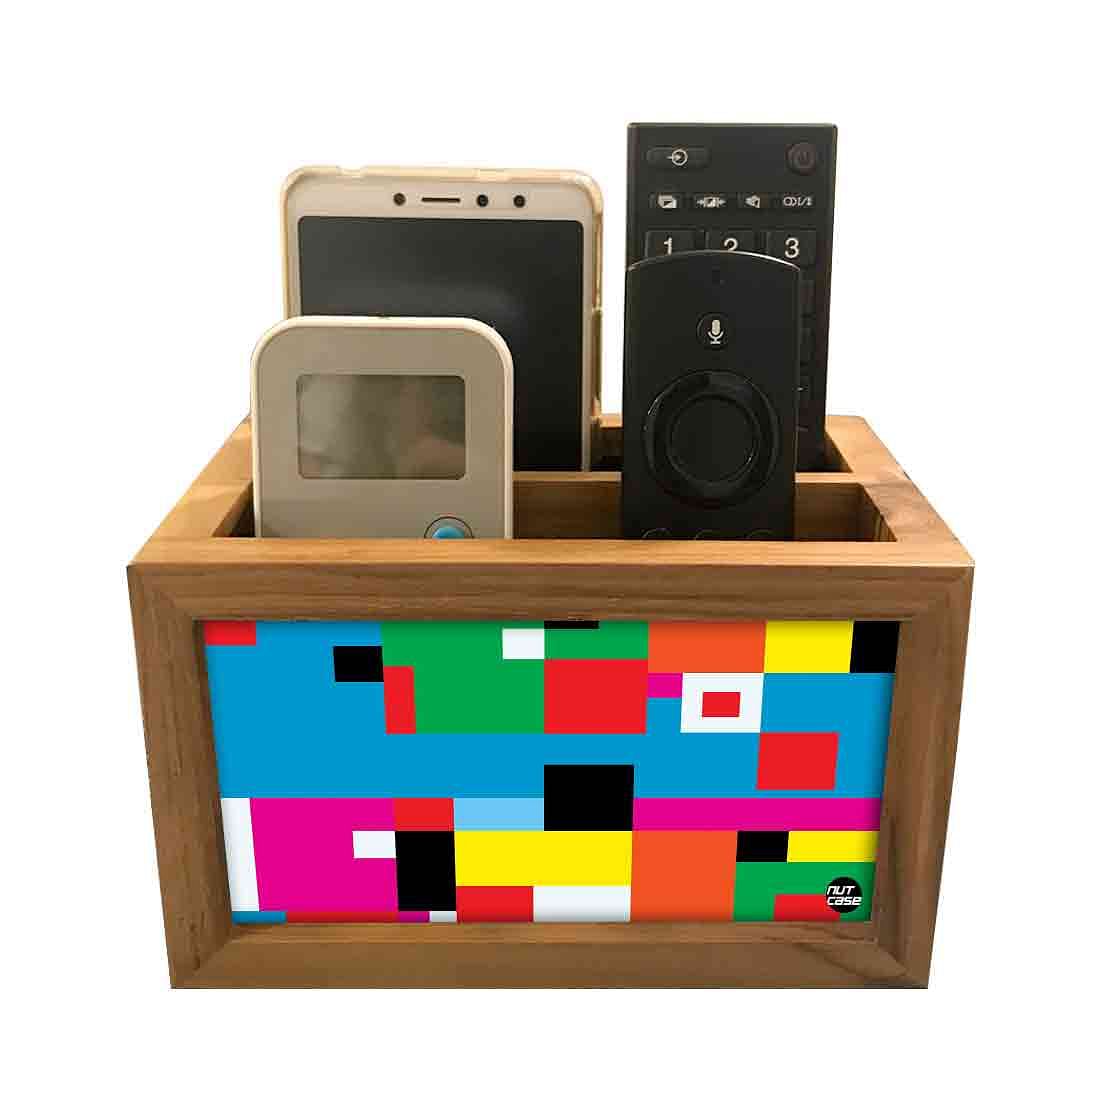 Cool Remote Control Holder For TV / AC Remotes -  Colorful Box Nutcase